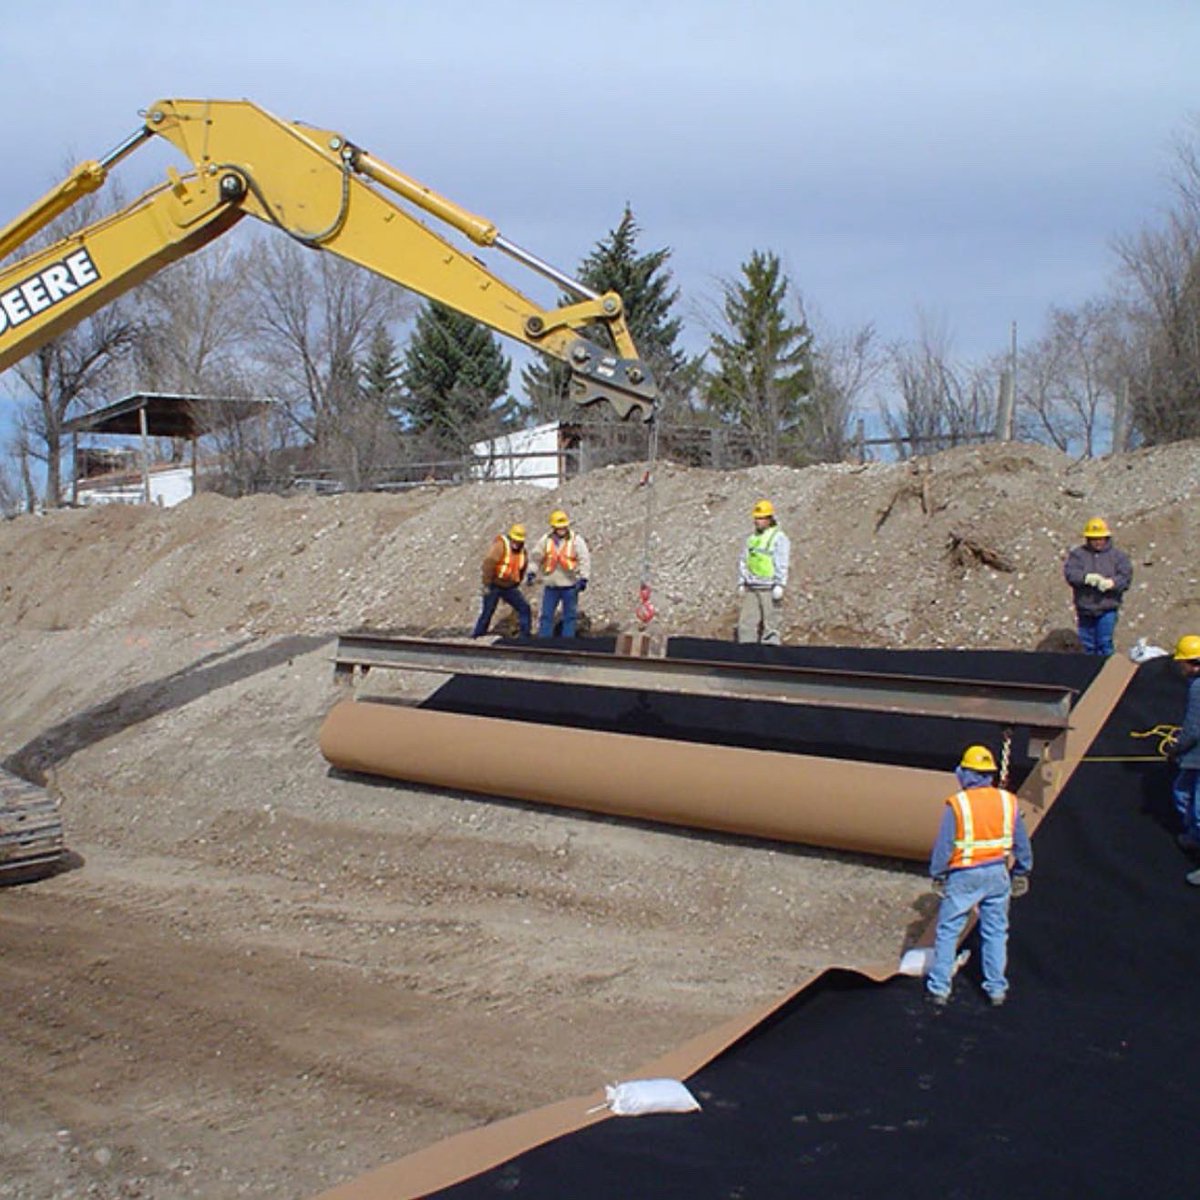 Geocomposites are formed by bonding two or more geosynthetics to achieve specific physical properties such as added protection, drainage, or filtration. 

#productsthatprotectourenvironment 
#geocomposites
#landfills
#drainagelayer
#drainage 
#constructionsupply 
#geosynthetics